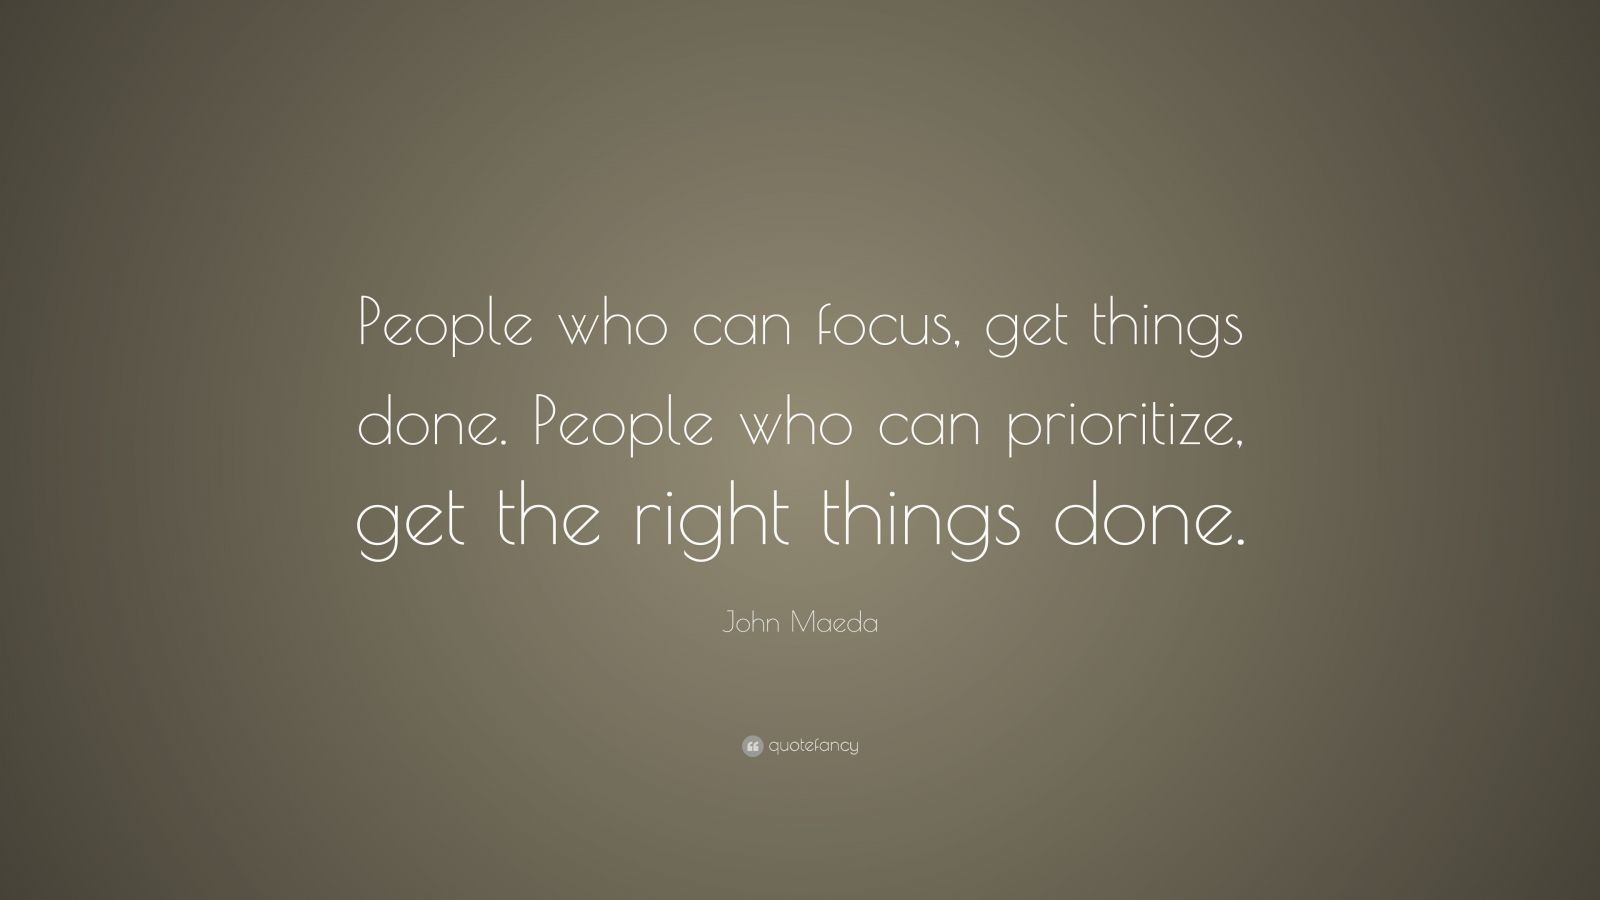 John Maeda Quote: “People who can focus, get things done. People who